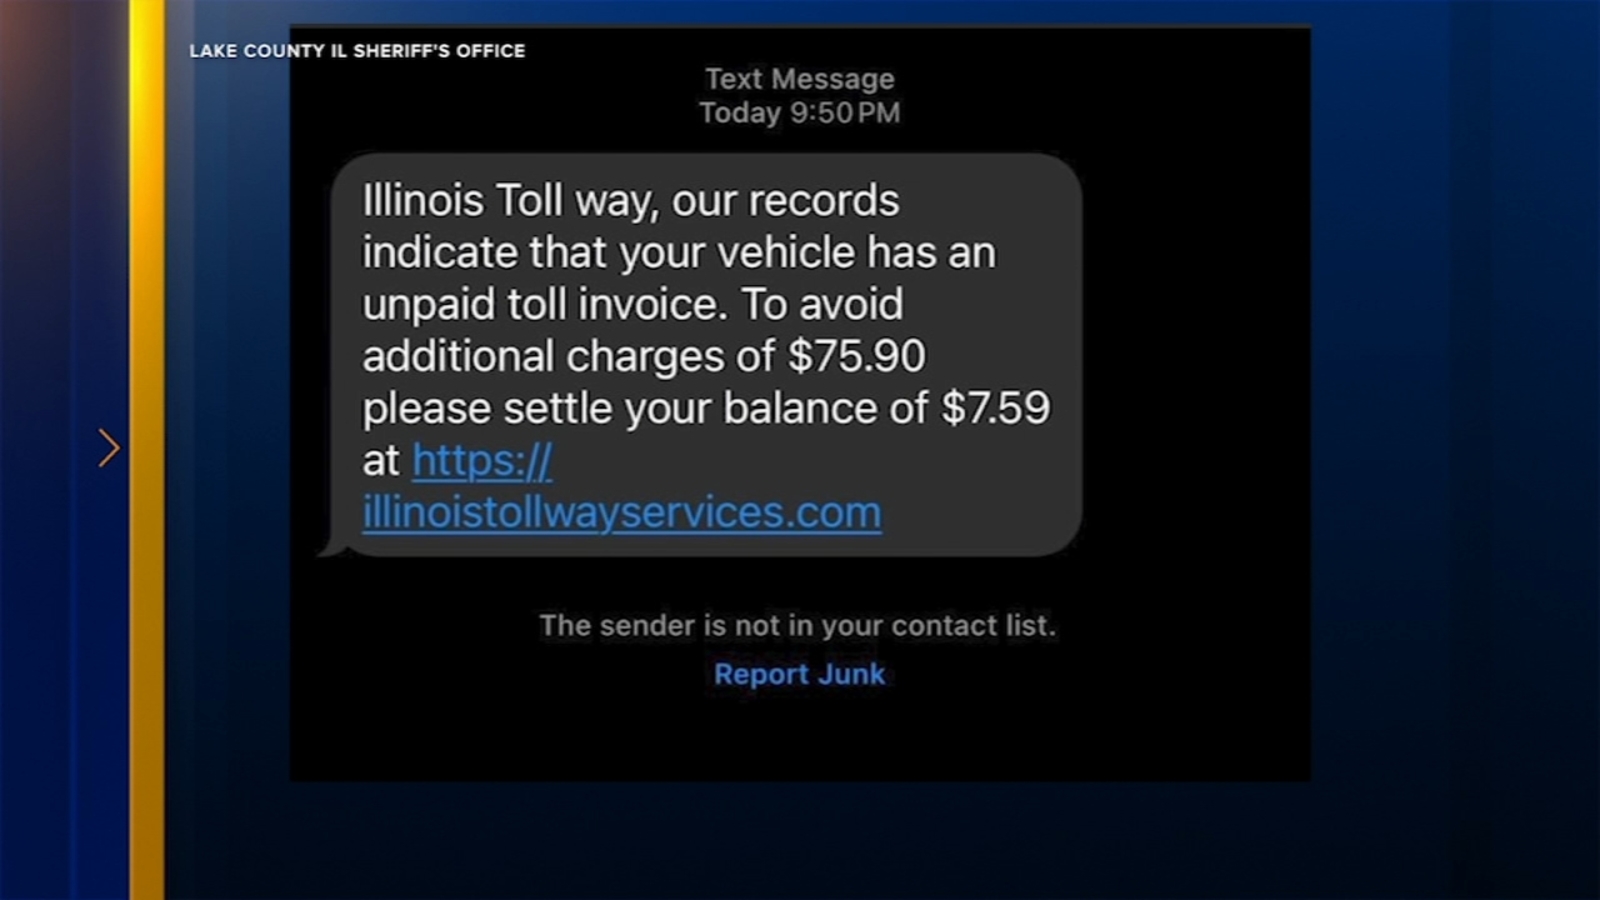 Mount Prospect police warn of Illinois Tollway phishing text message scam, tell I-PASS users to report incidents [Video]